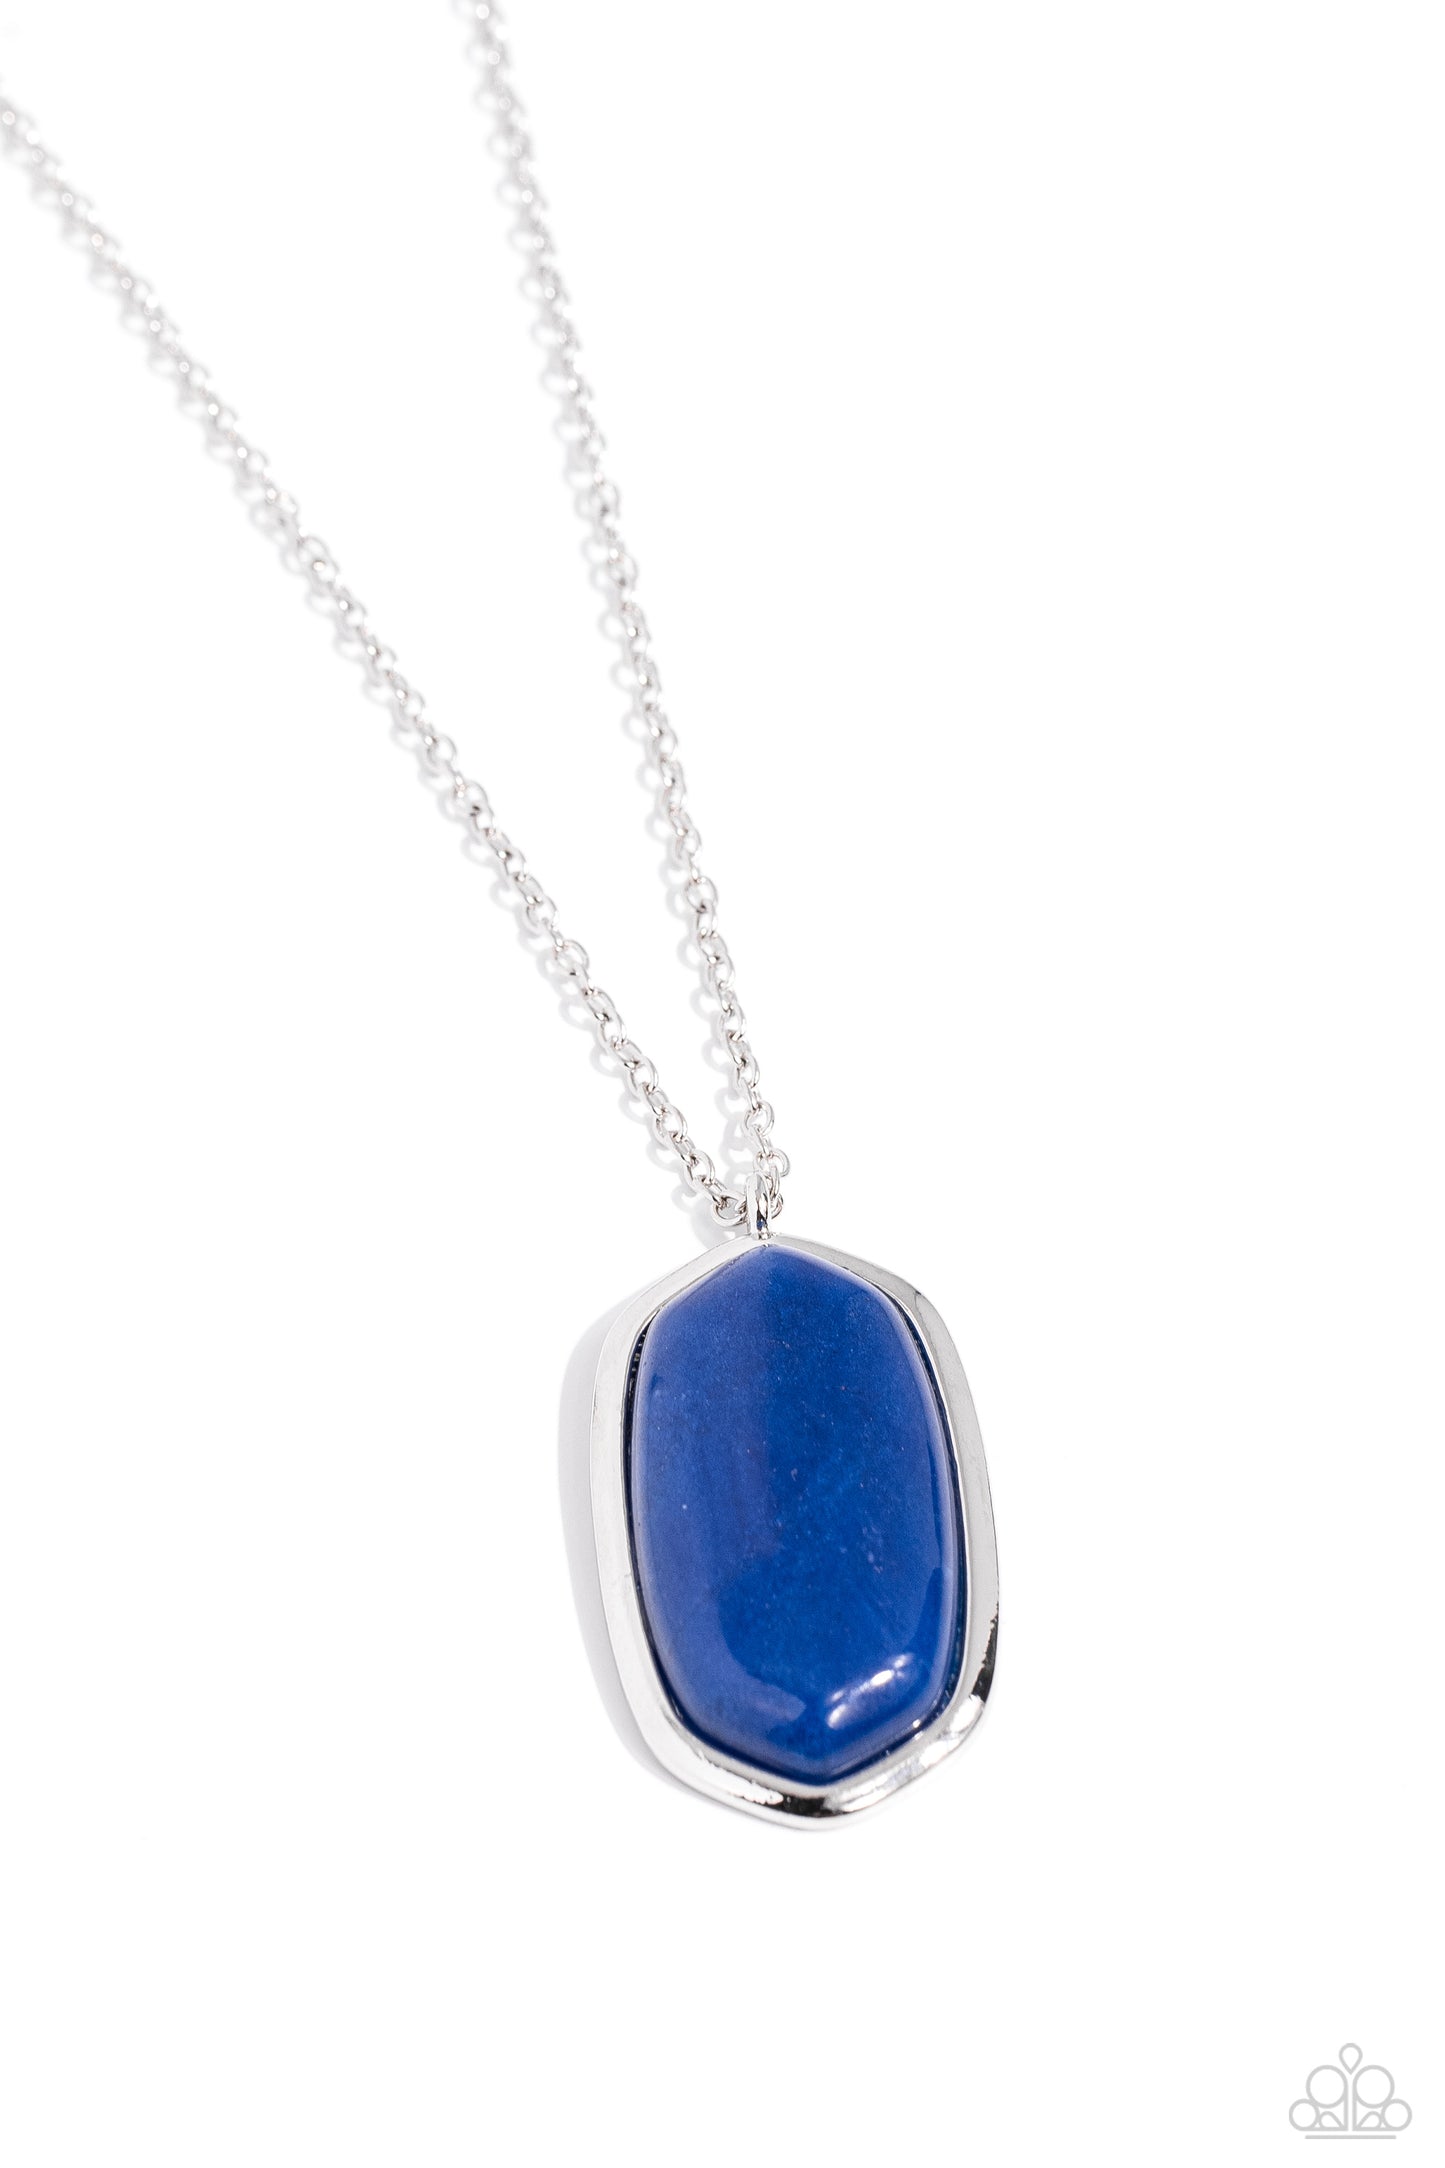 STYLE in the Stone - Blue Necklace